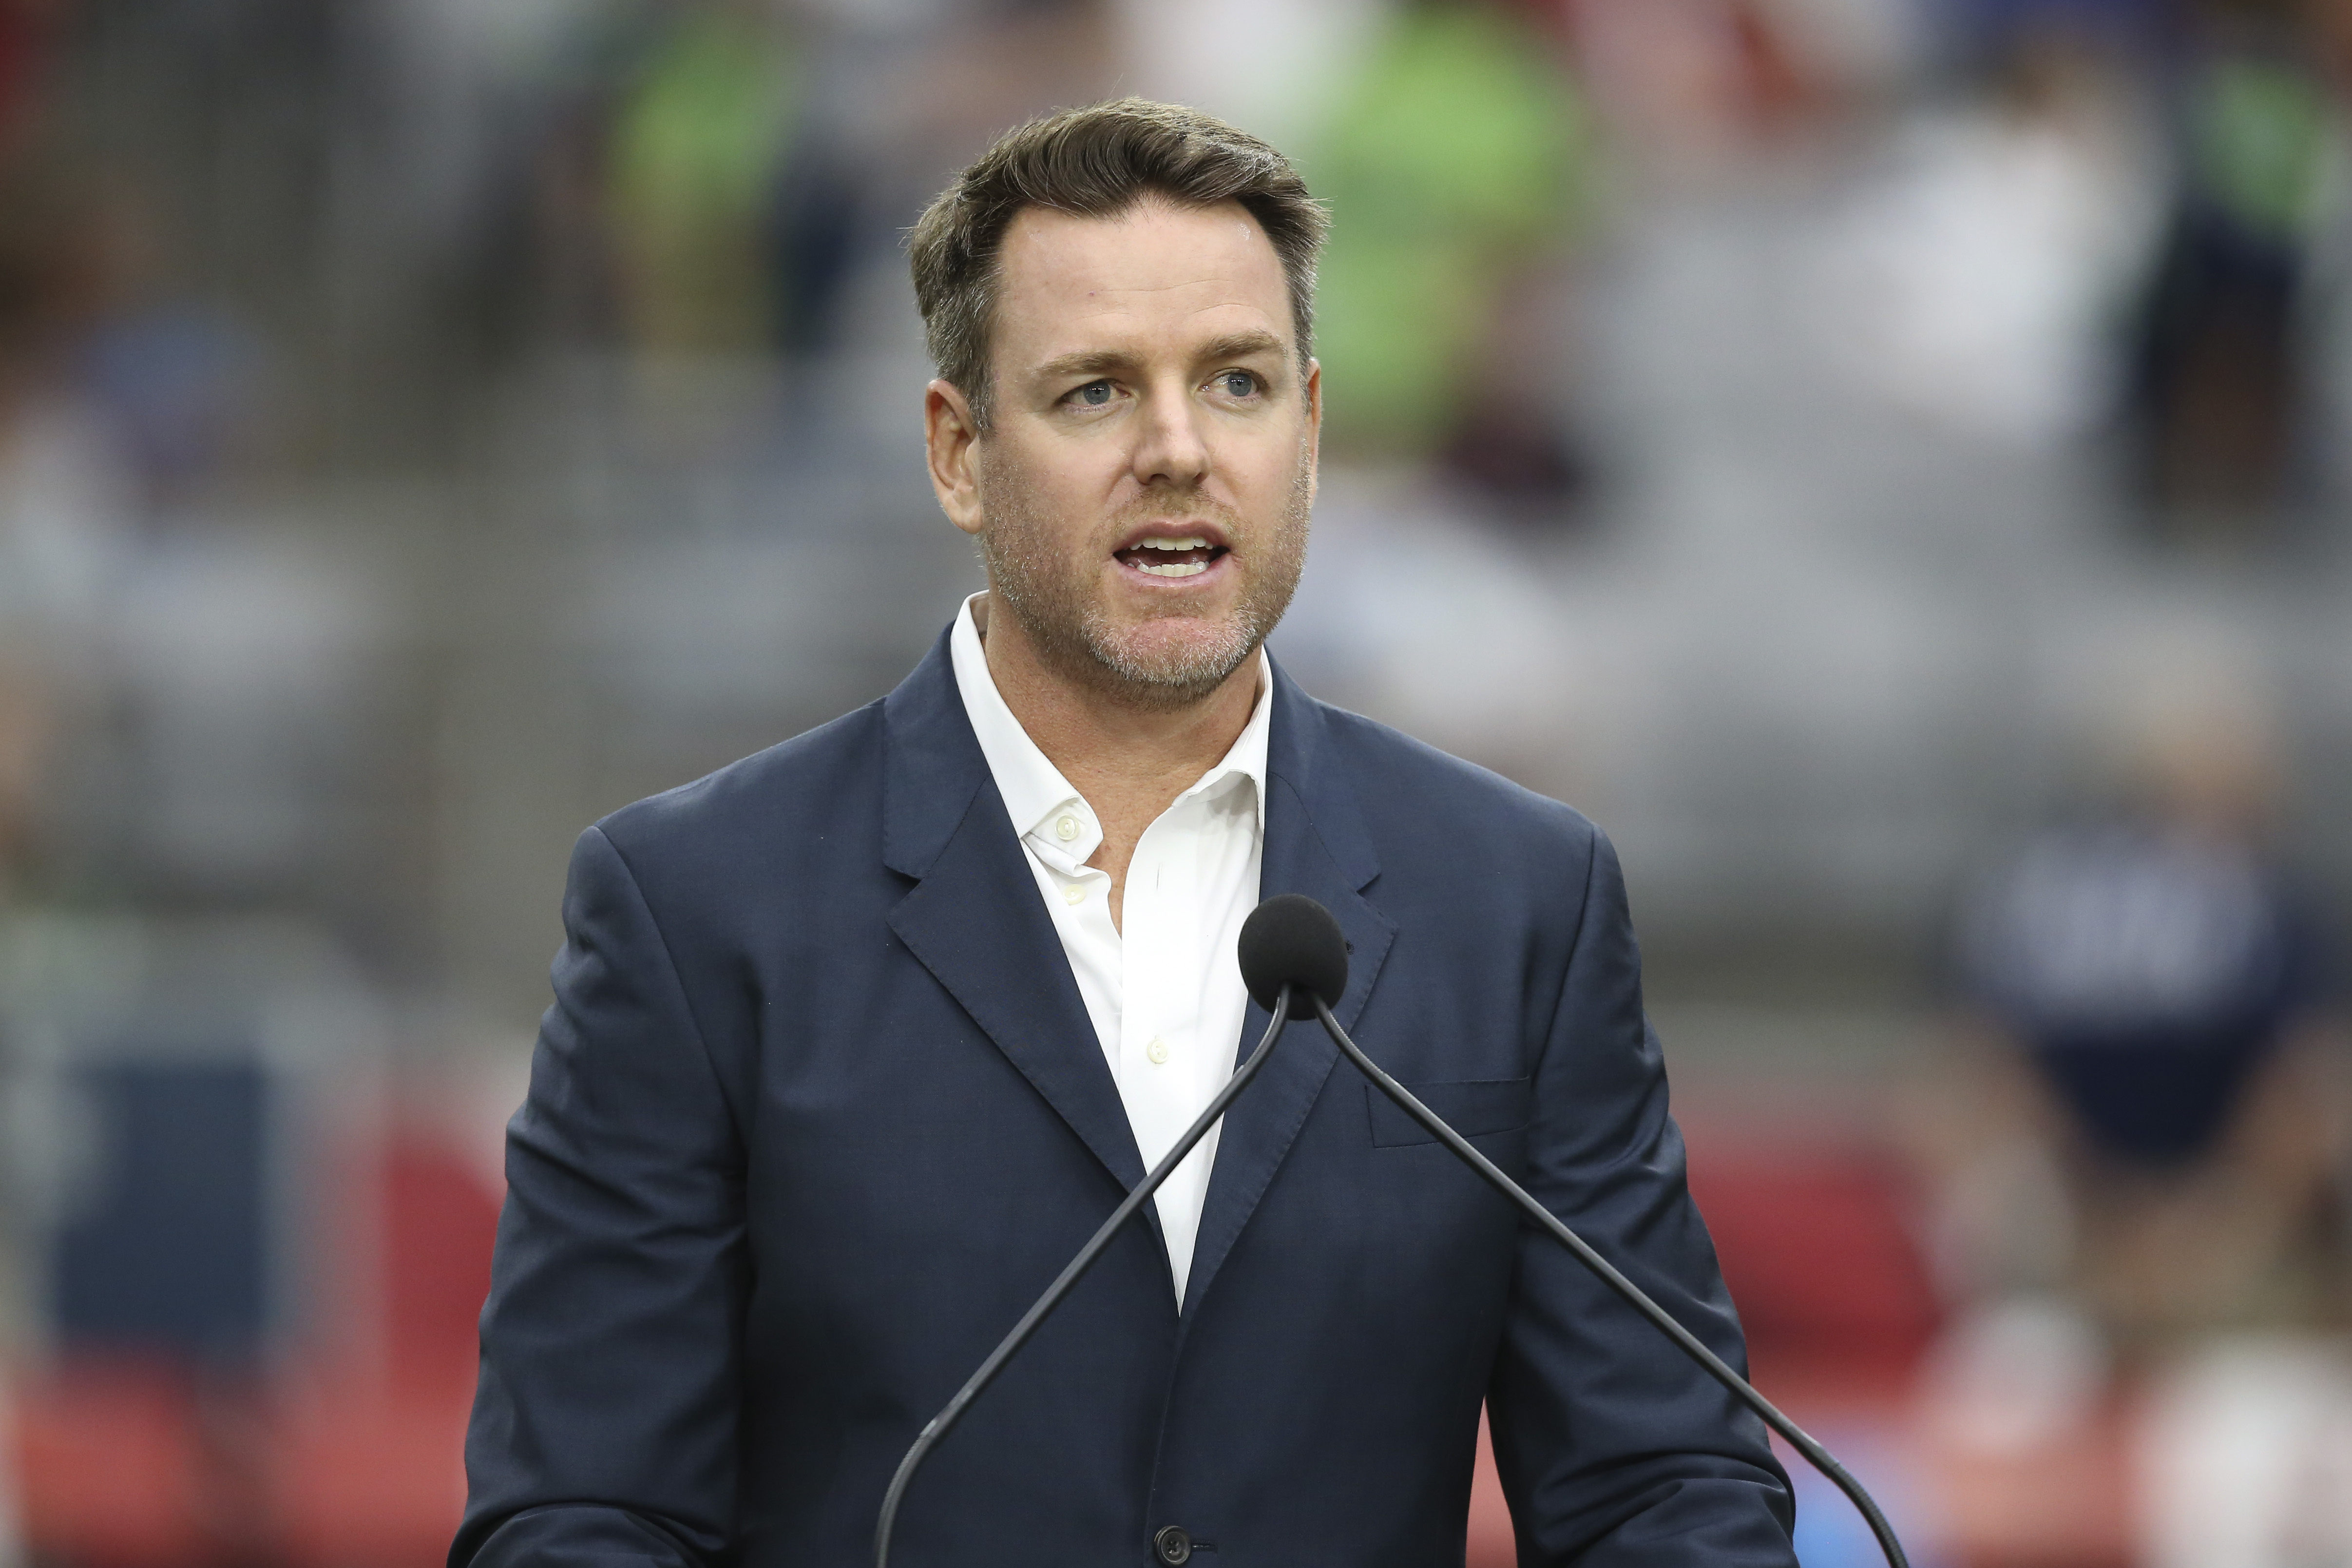 USC Legend Carson Palmer Says Steelers' Mike Tomlin Could Be 'Wild Card' for HC Job